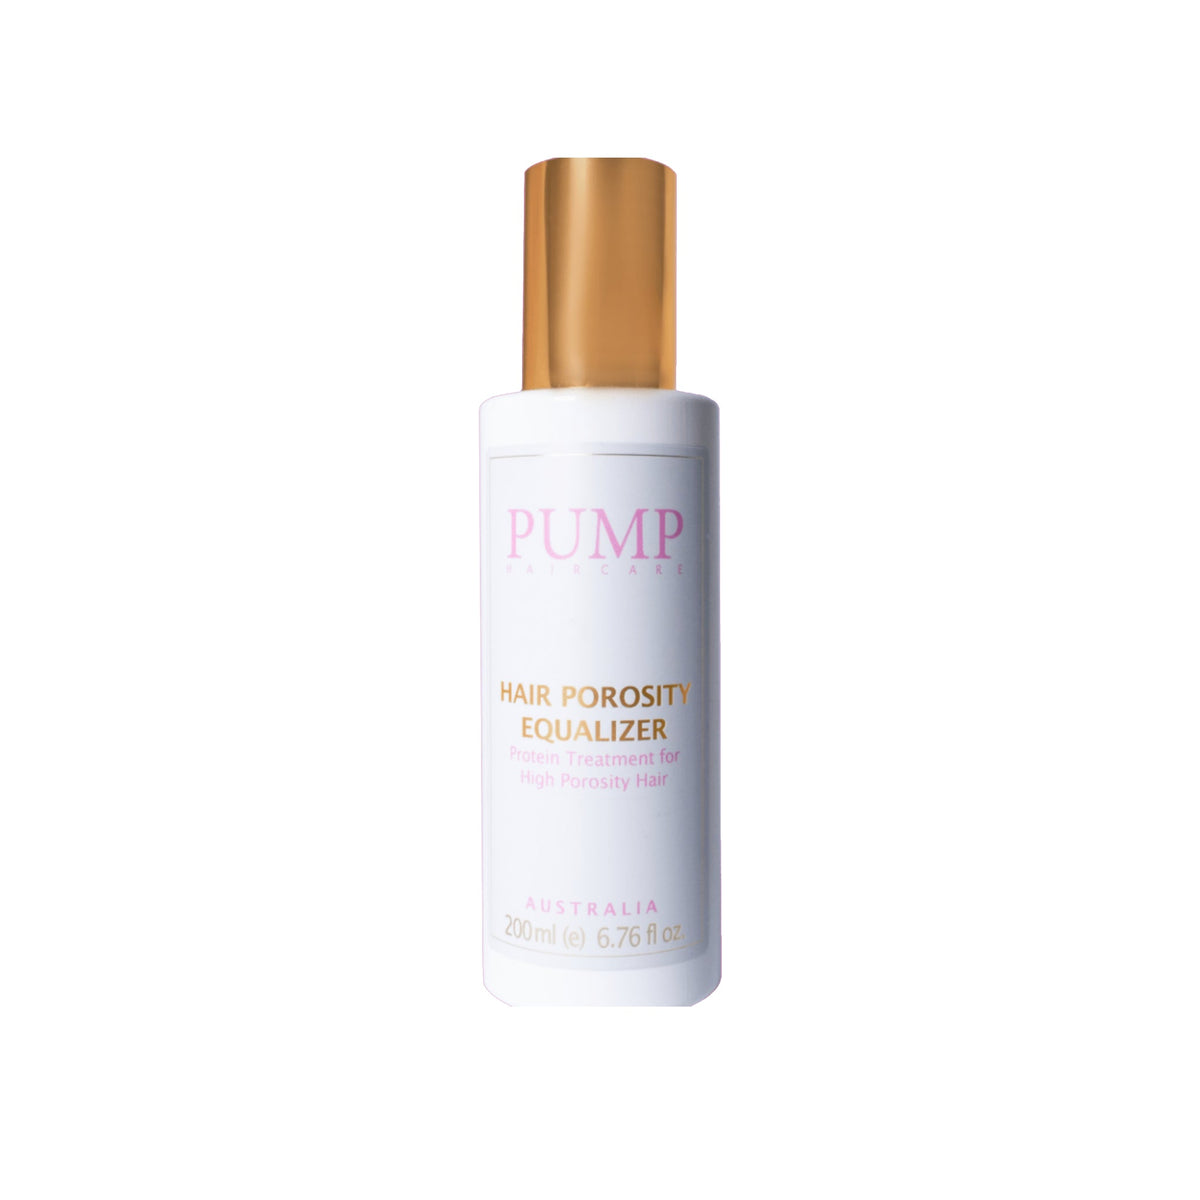 Pump Hair porosity Equalizer - Haircare Superstore